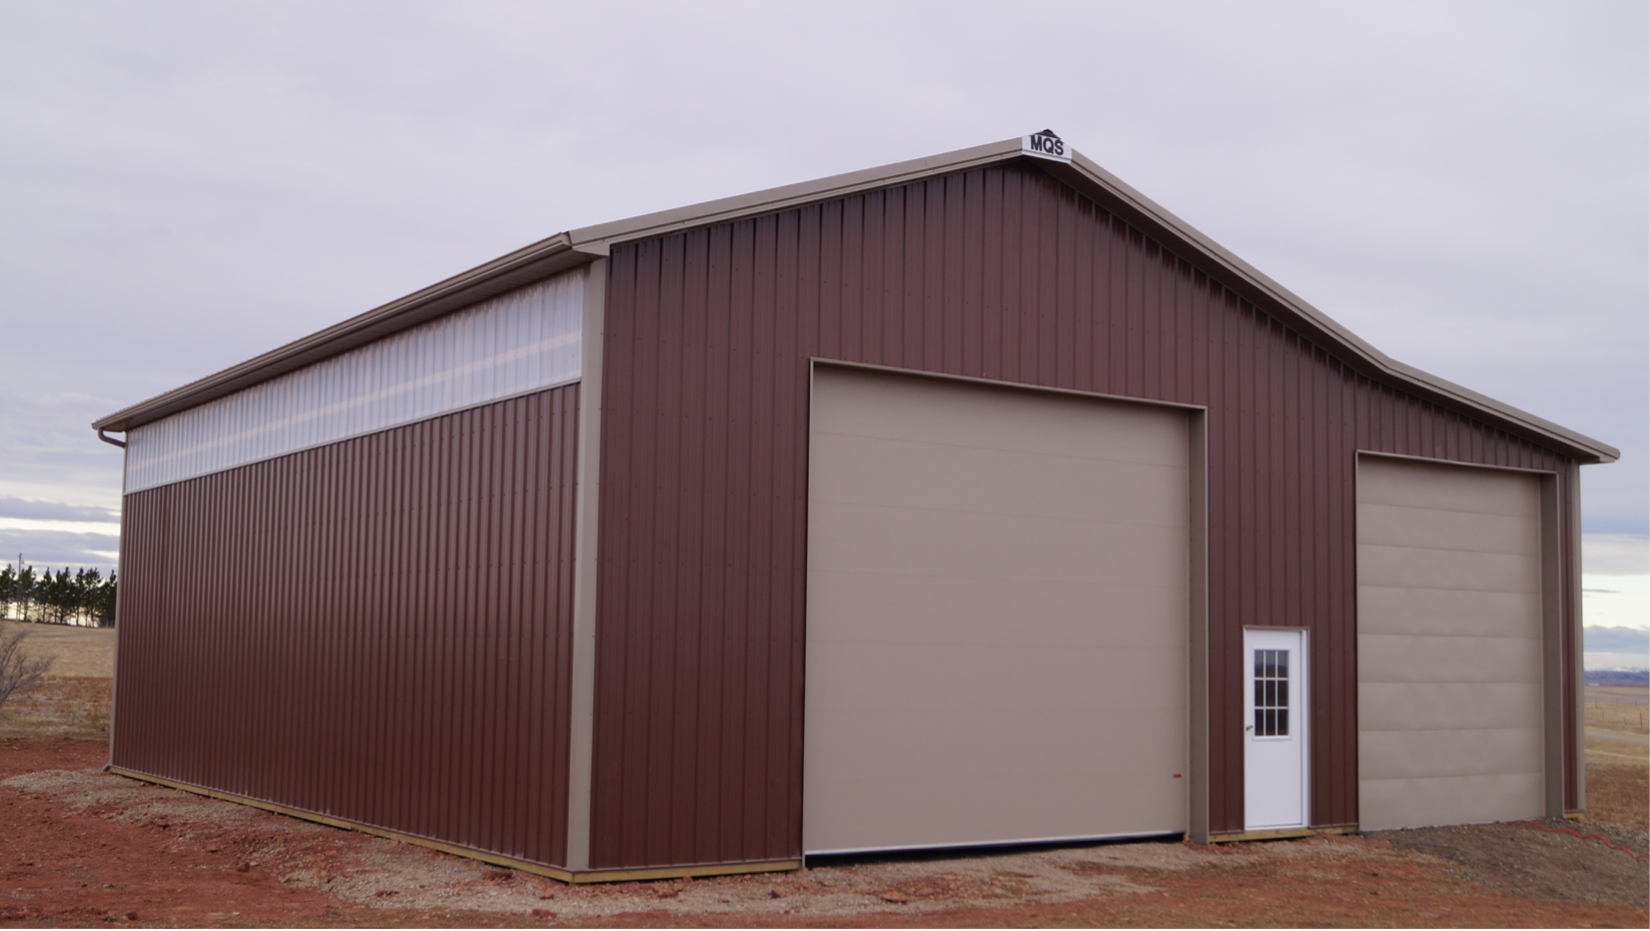 6 Popular Reasons Why People Build a New Post Frame Garage in Wyoming